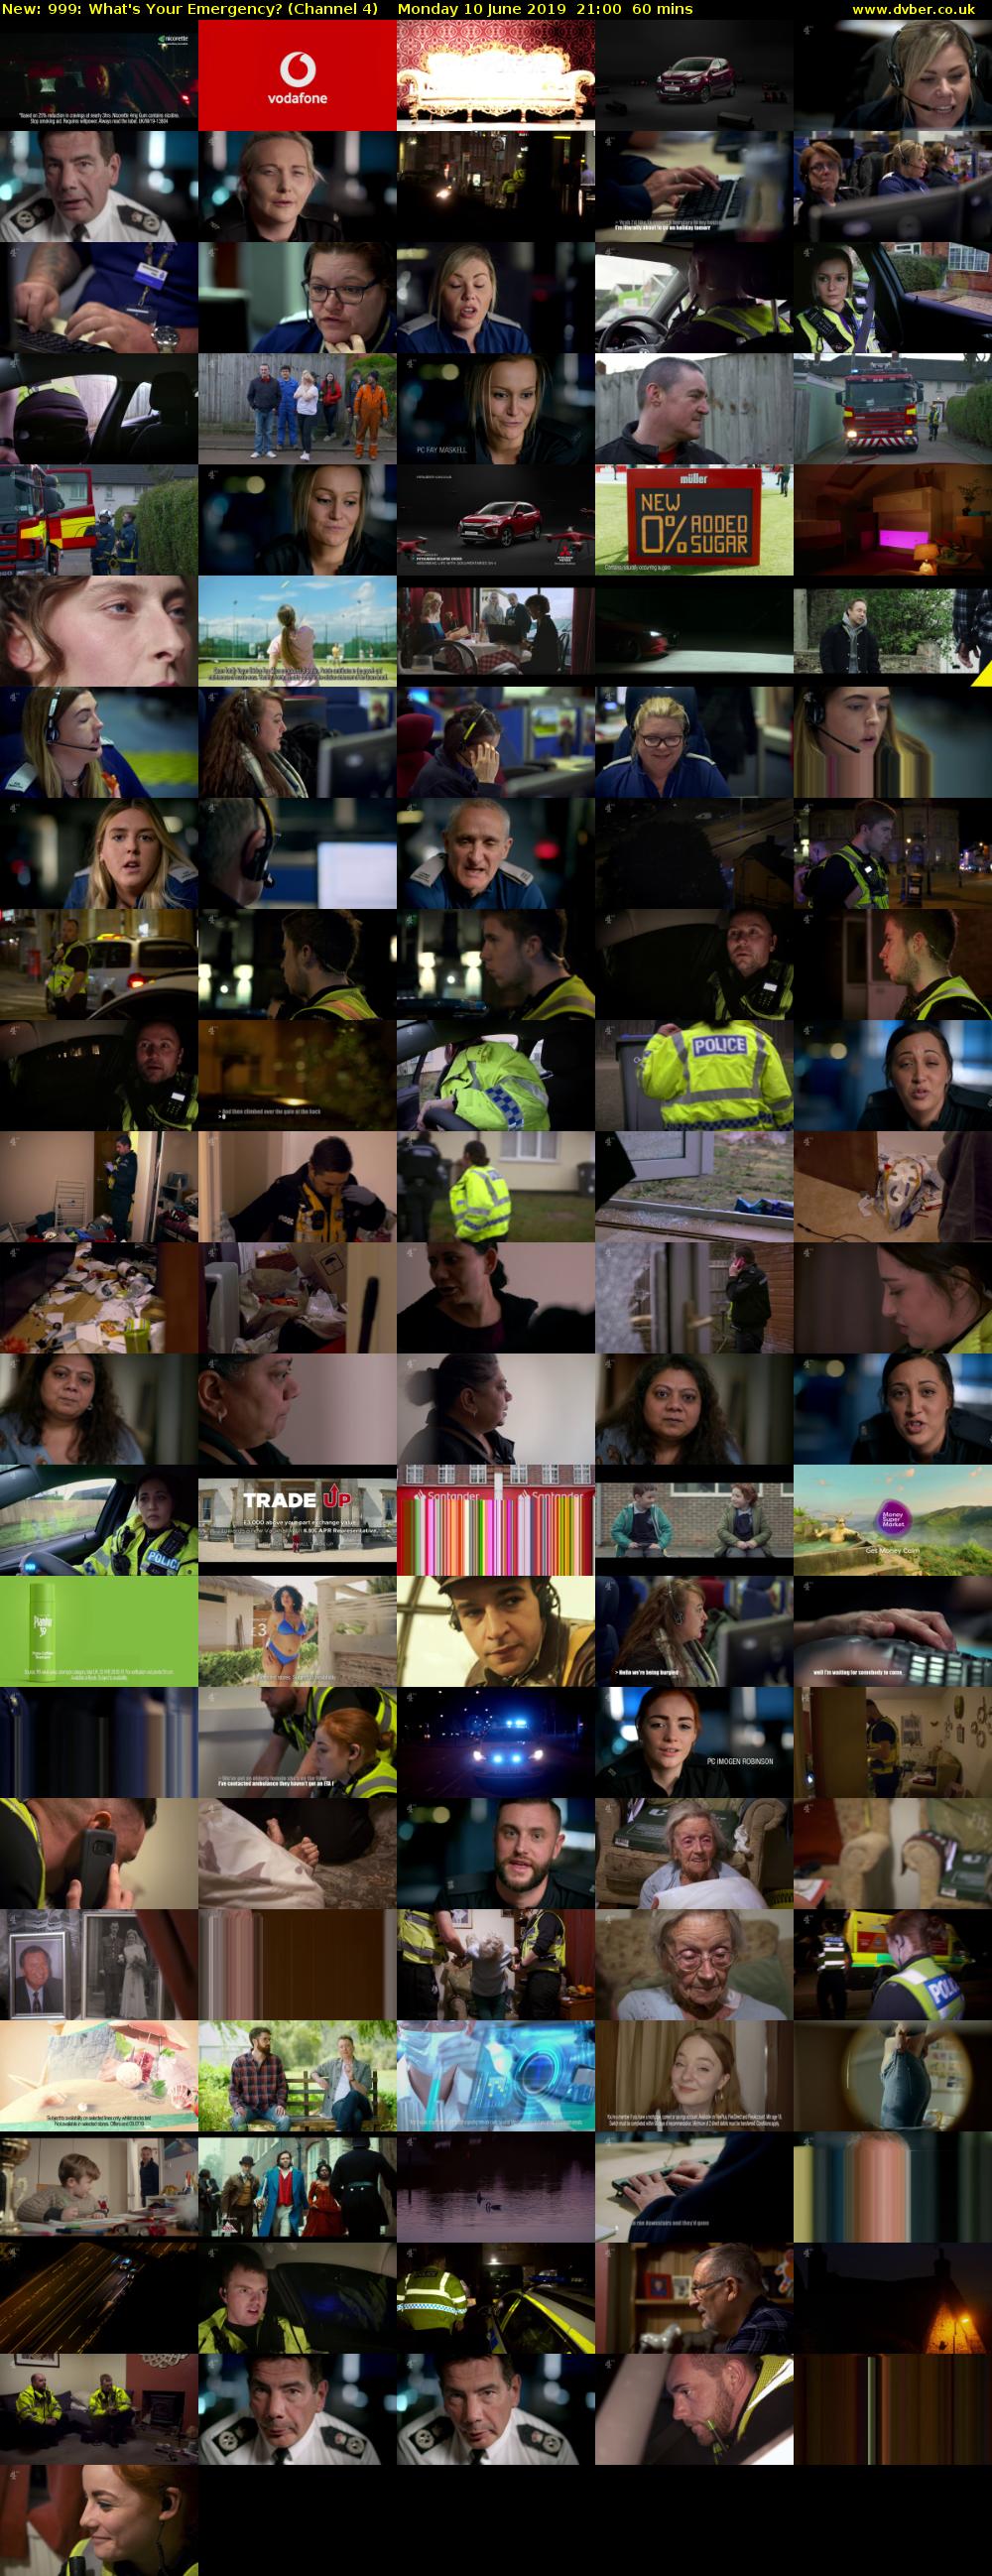 999: What's Your Emergency? (Channel 4) Monday 10 June 2019 21:00 - 22:00